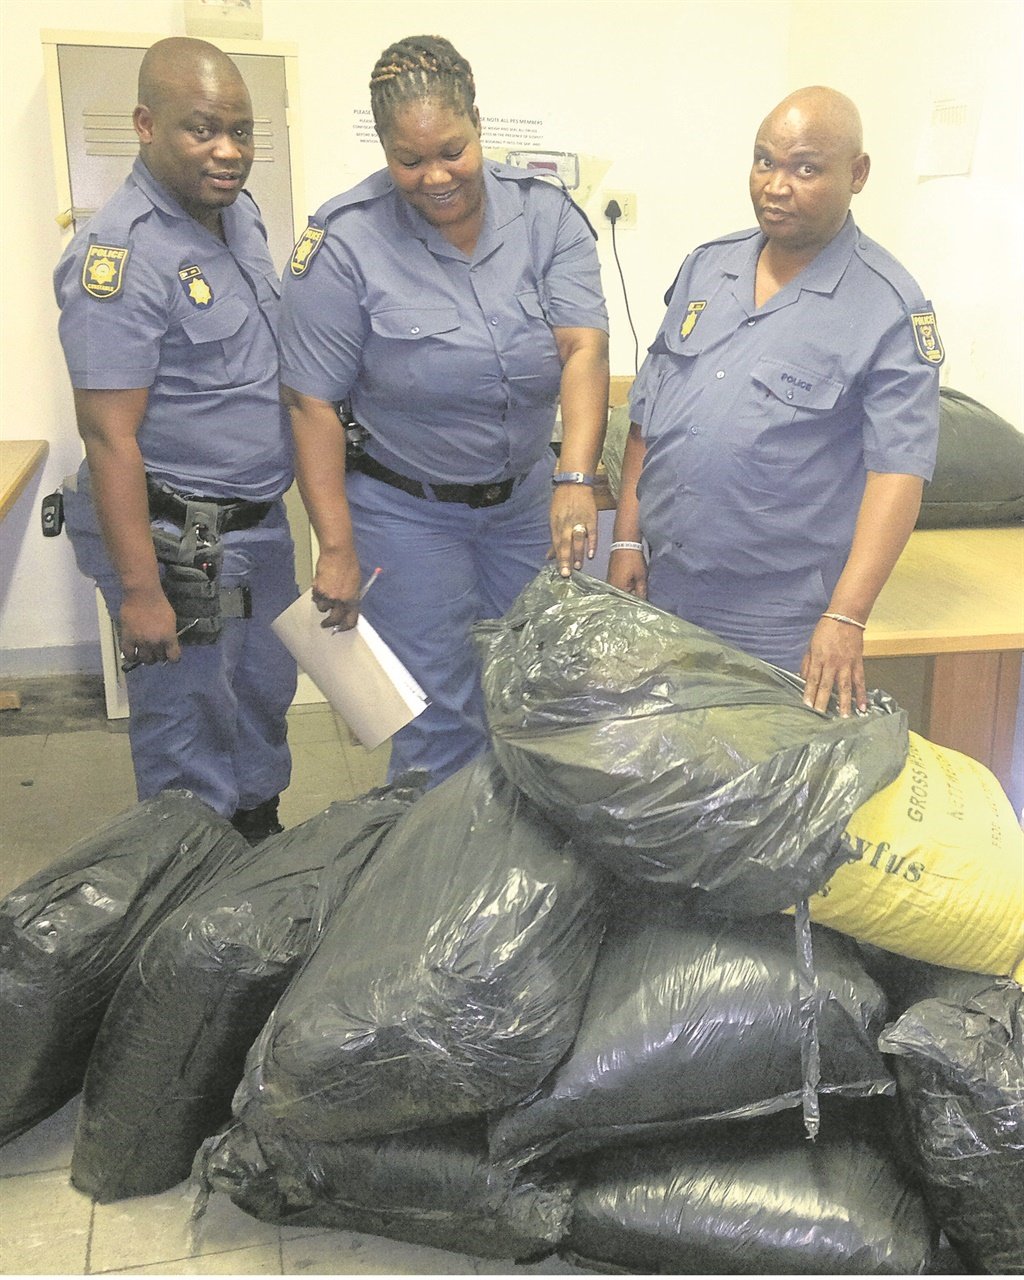 Constables Lesego Atoro and Ngcelo Nele and Warrant Officer Nathan Romein with the bags they confiscated. Photo supplied by SAPS